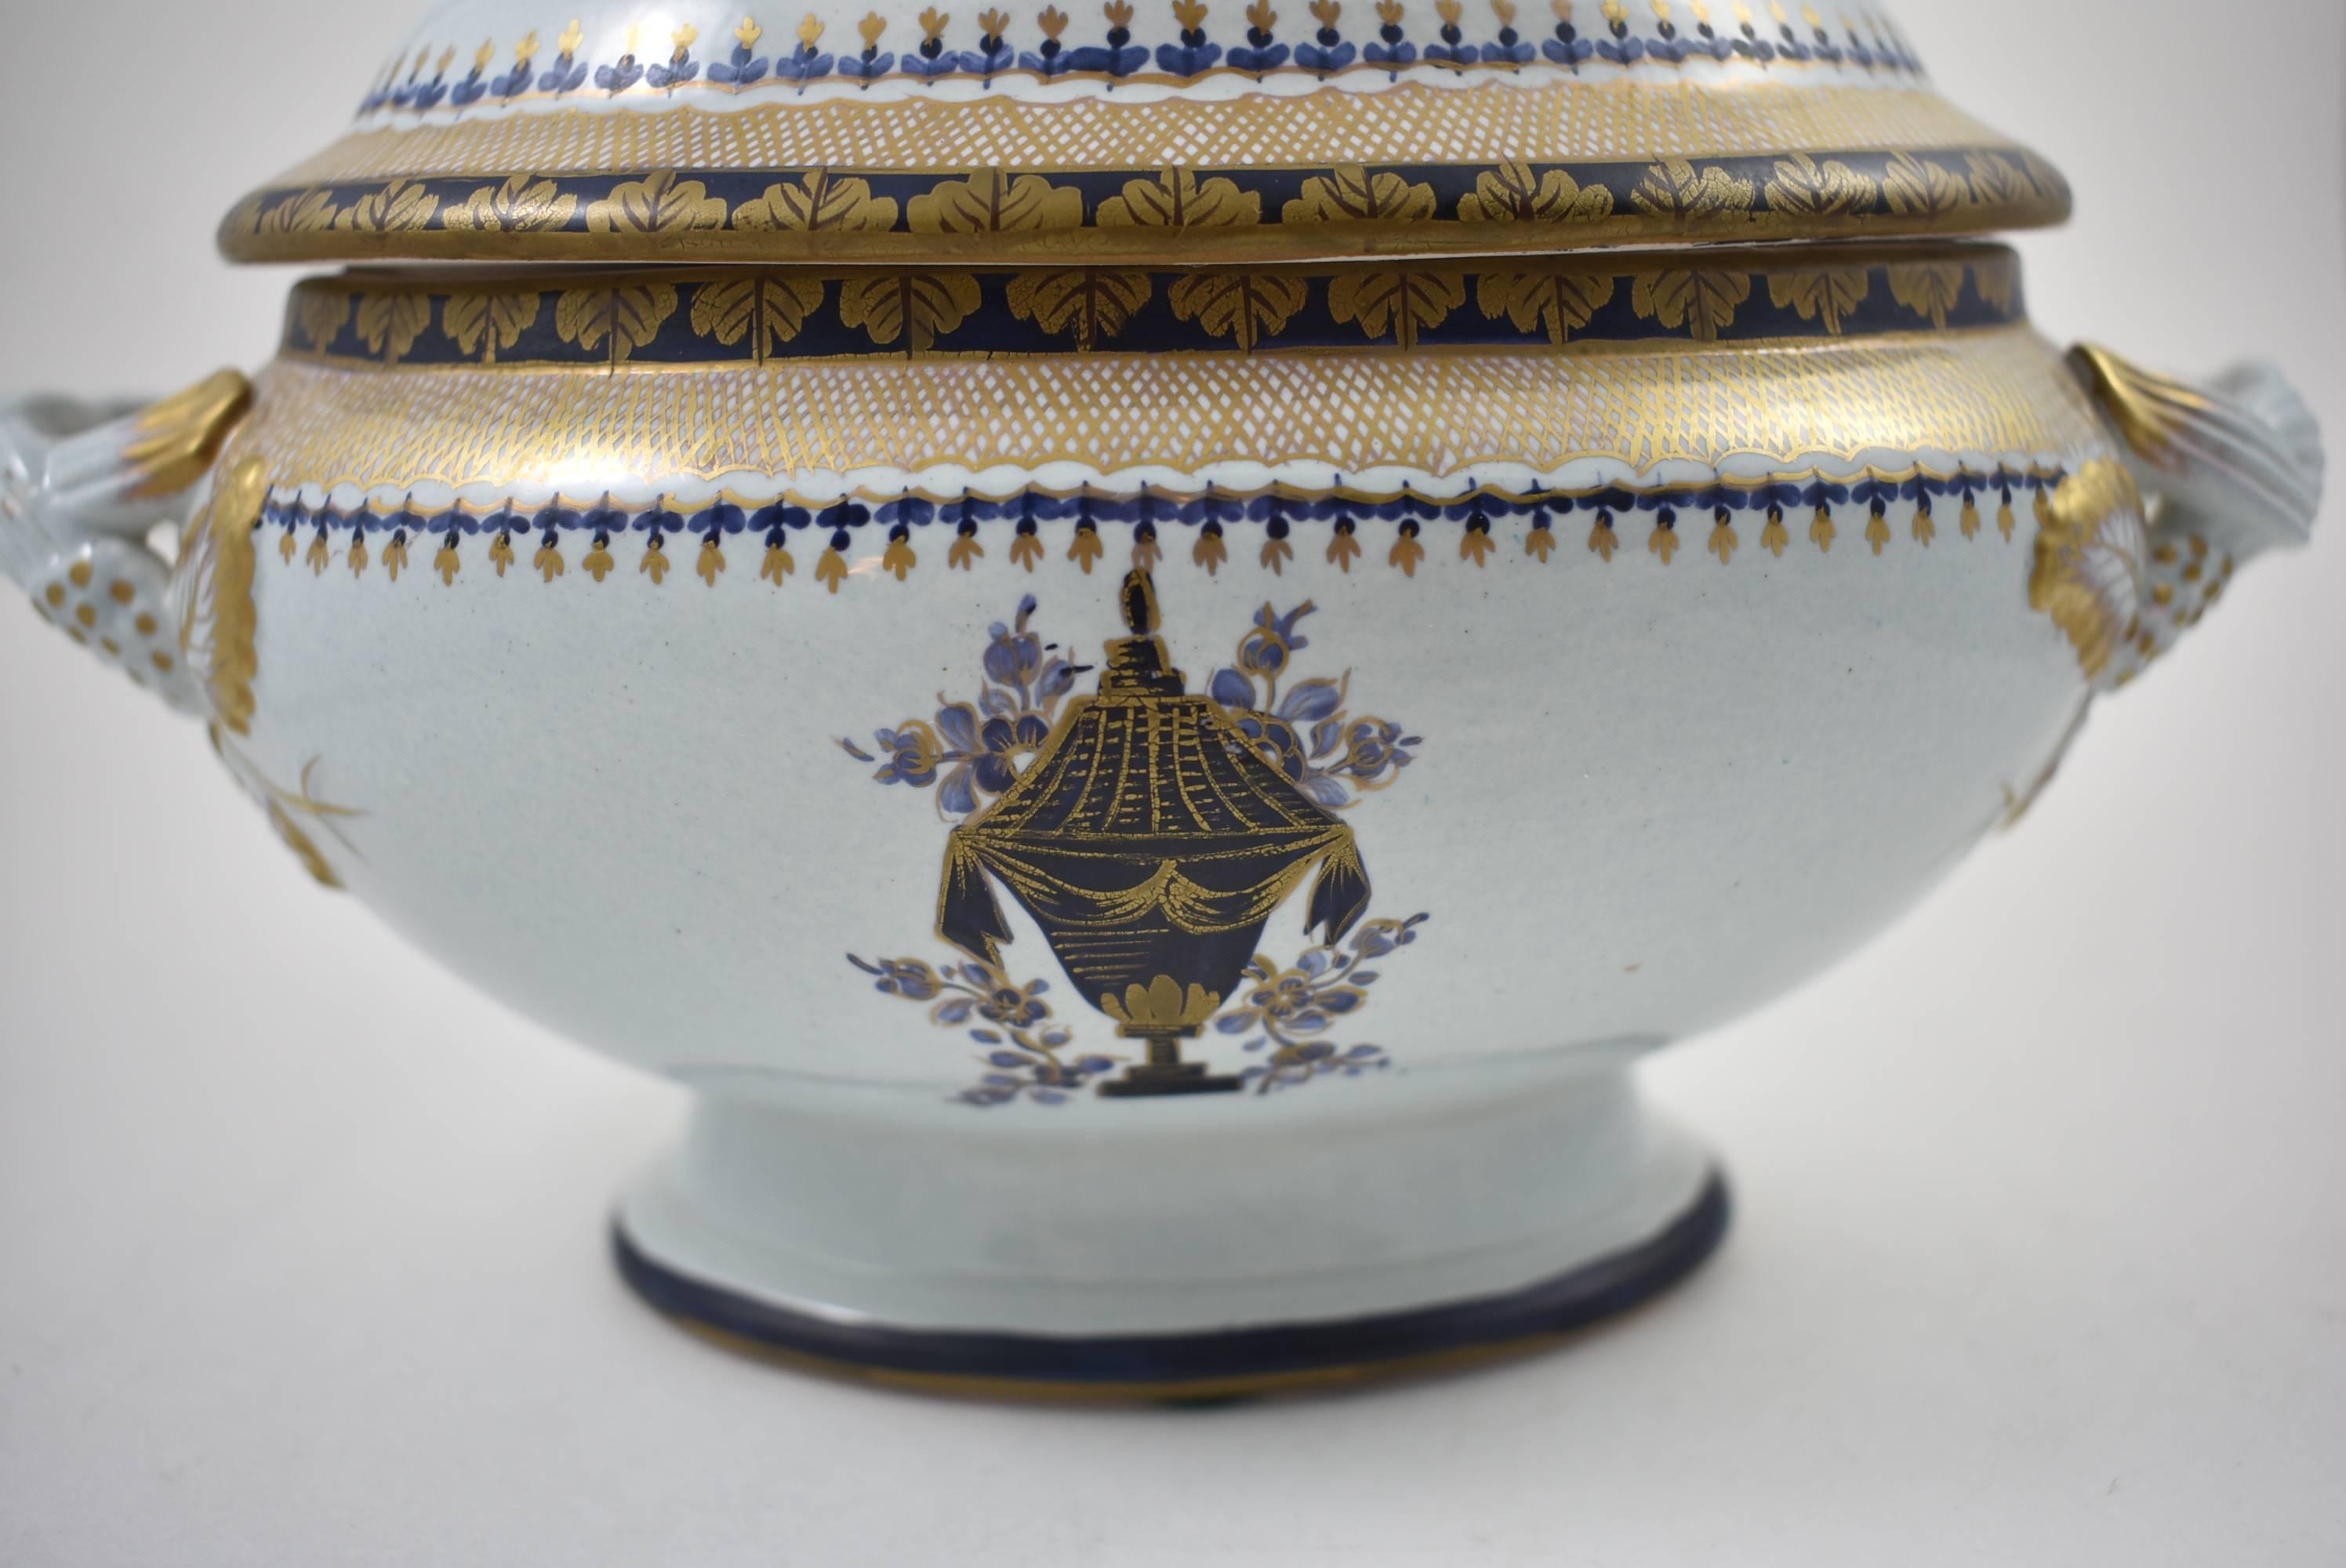 Italian Lowestoft Reproduction Created by Mottahedeh Porcelain Covered Tureen In Good Condition For Sale In Toledo, OH